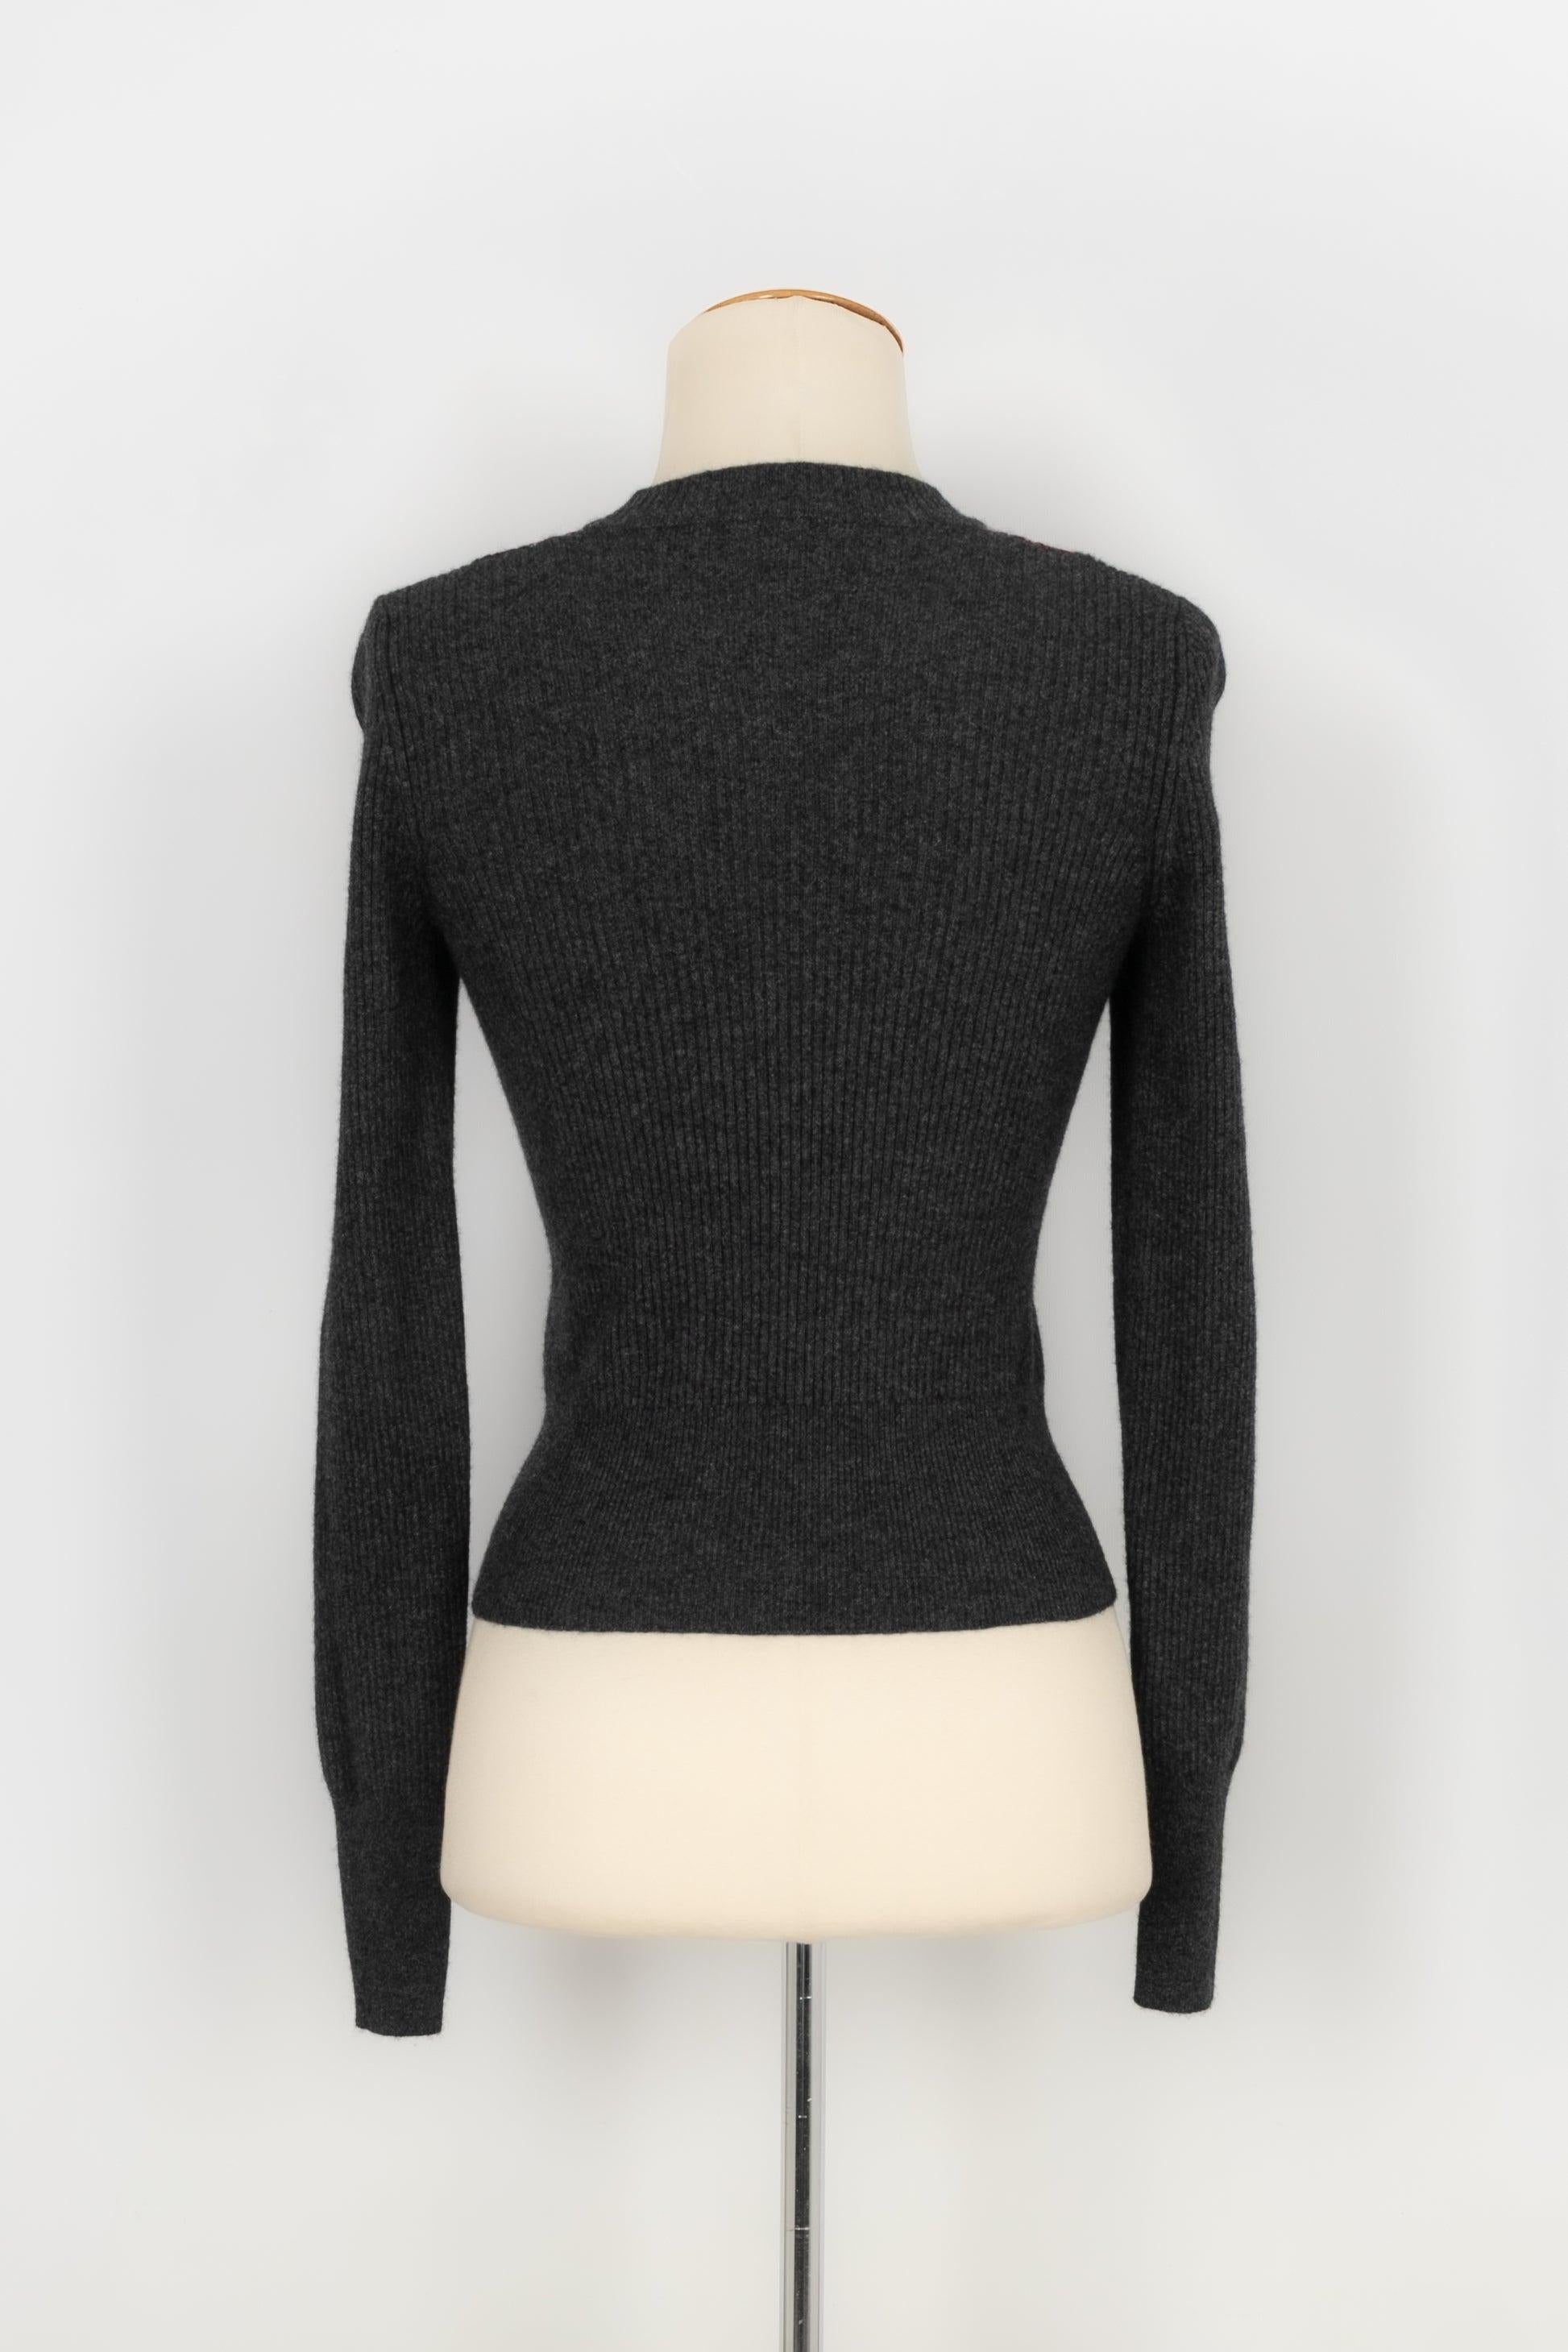 Chanel Cashmere and Wool Sweater Fall, 2007 In Excellent Condition For Sale In SAINT-OUEN-SUR-SEINE, FR